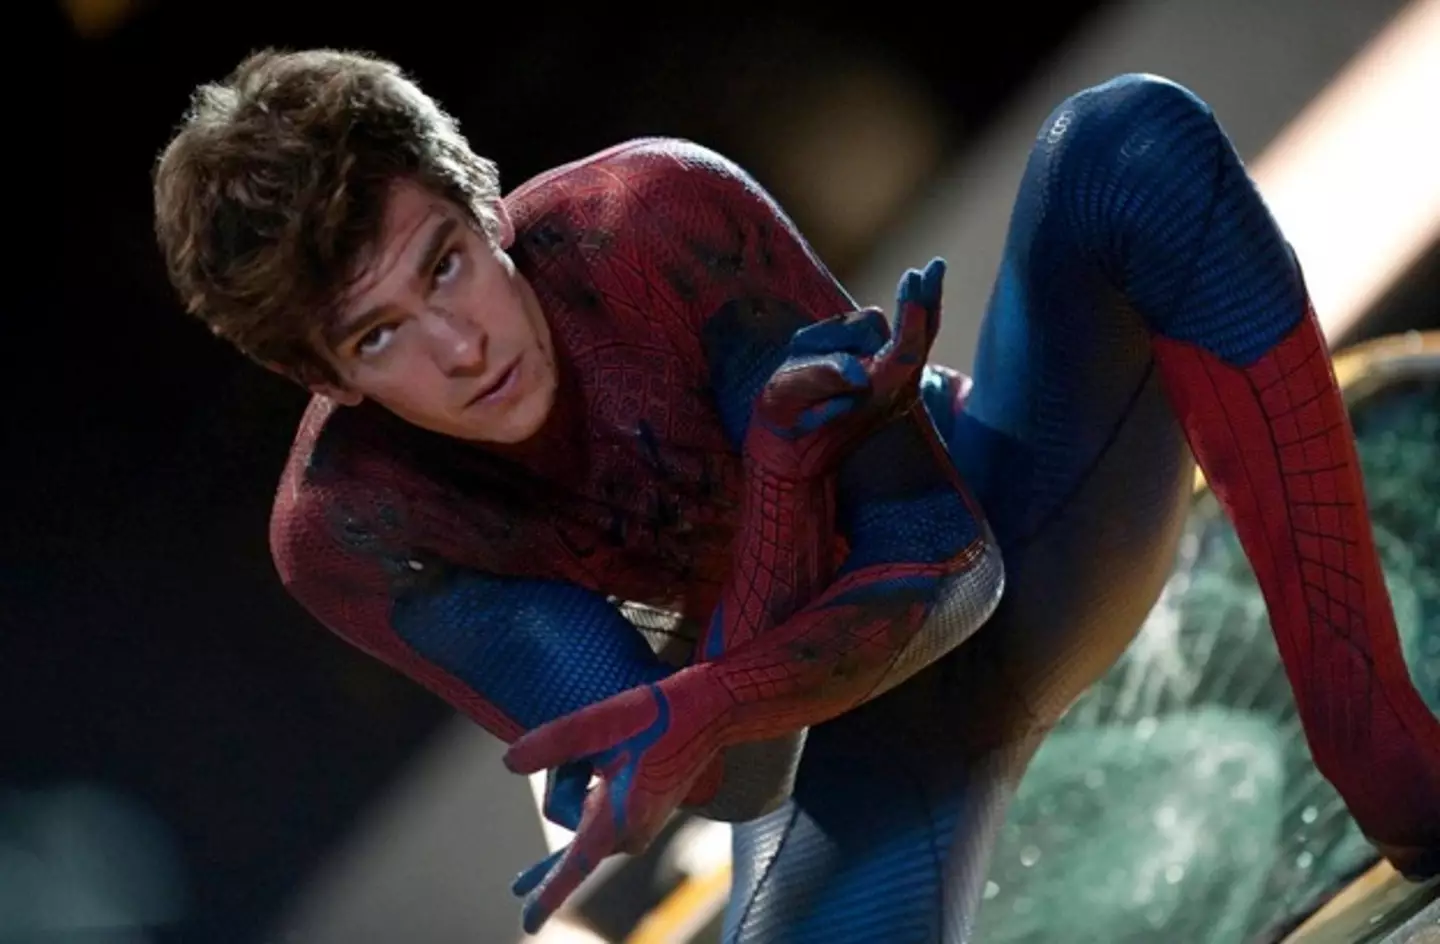 Andrew Garfield in his role as Spider-Man.